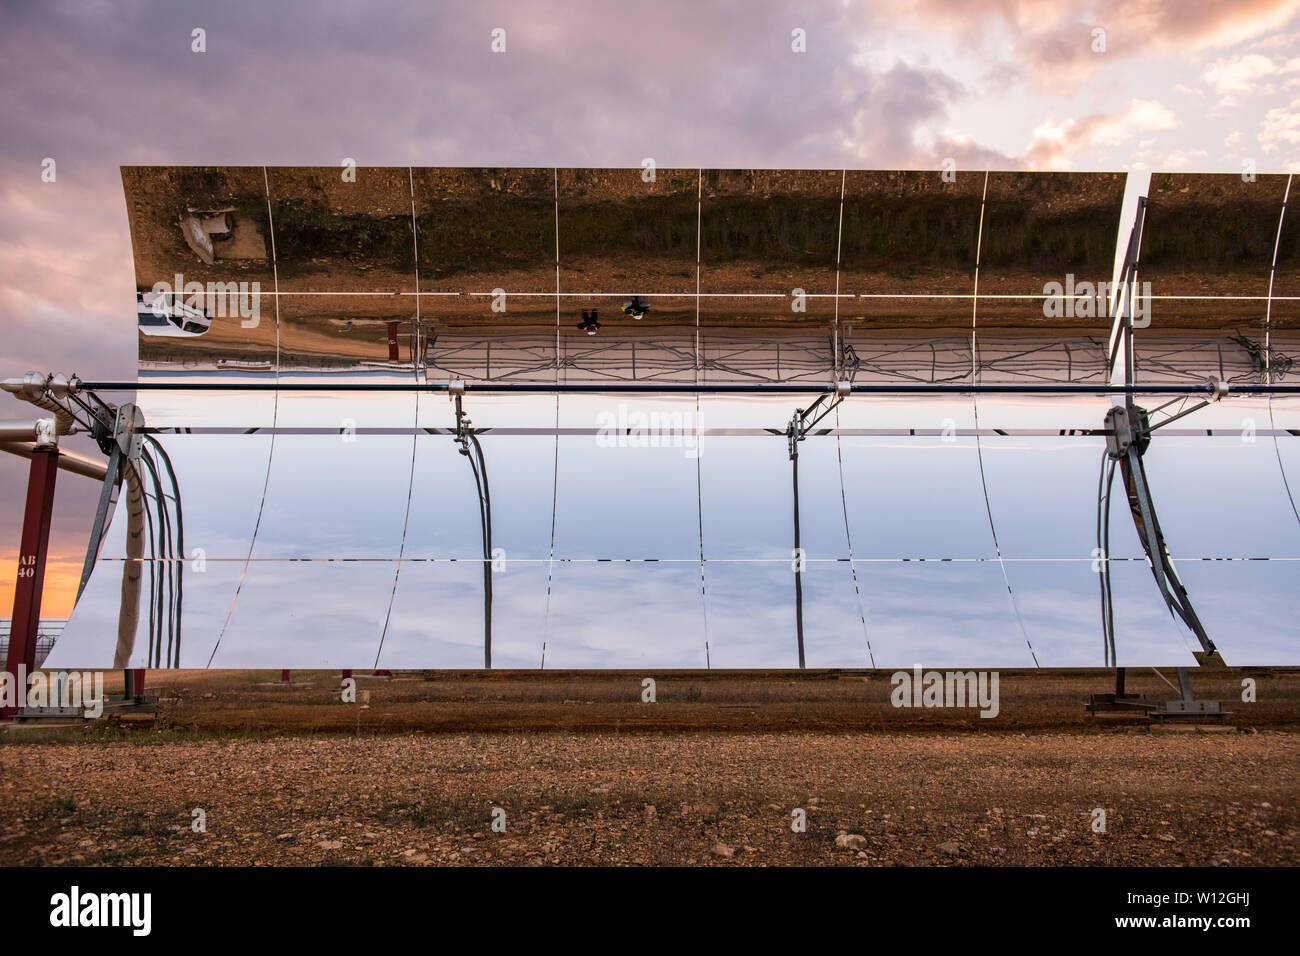 Logrosan, Extremadura, Spain - March 23, 2019: Detail of the concentrators and solar panels of the solar thermal power plant Solaben in Logrosan, Extr Stock Photo